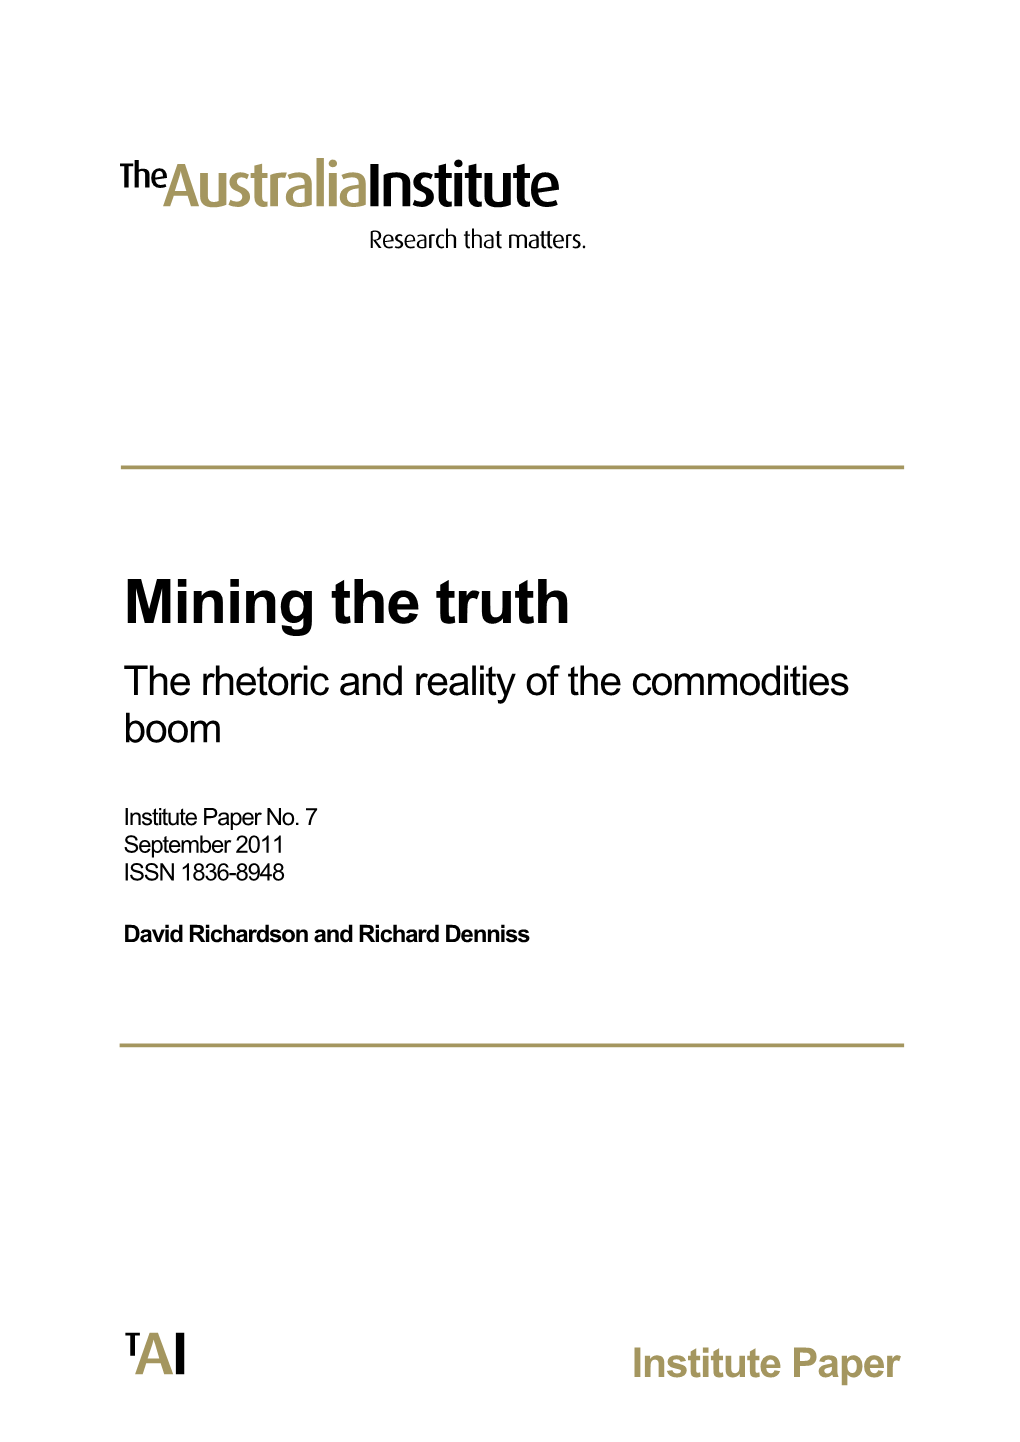 Mining the Truth the Rhetoric and Reality of the Commodities Boom